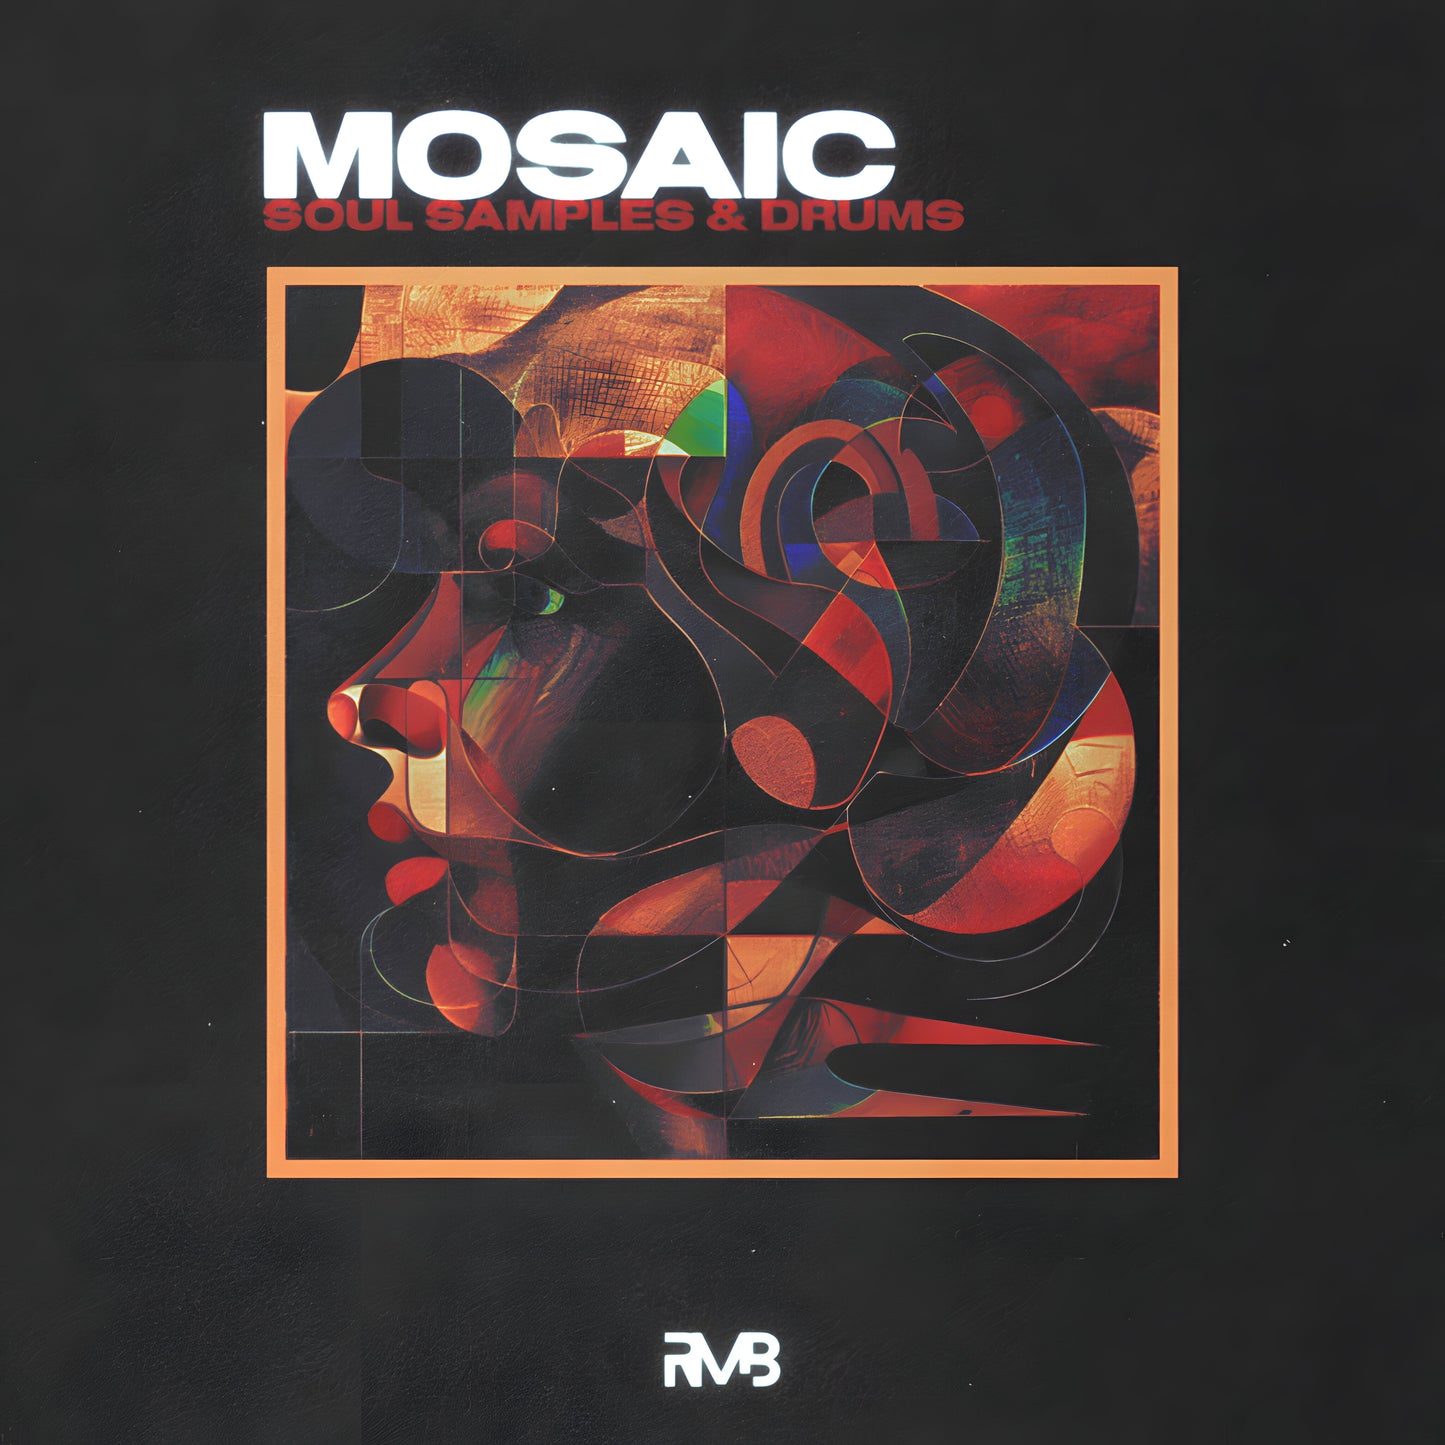 Mosaic - Chill Soul Samples & Drums - RMB Justize Official Website